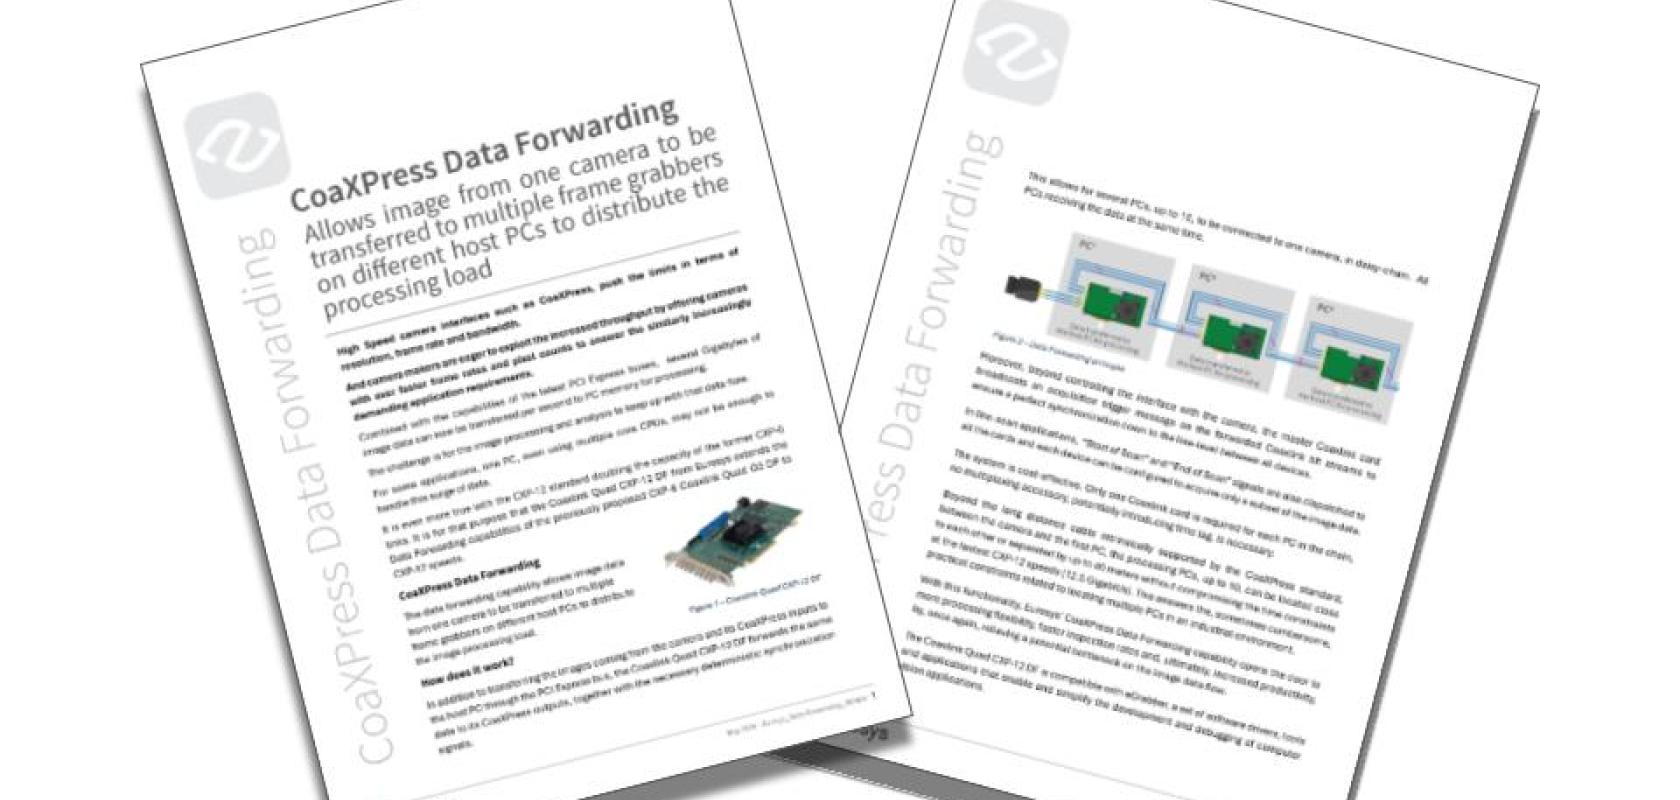 CoaXPress Data Forwarding: A White Paper from Euresys